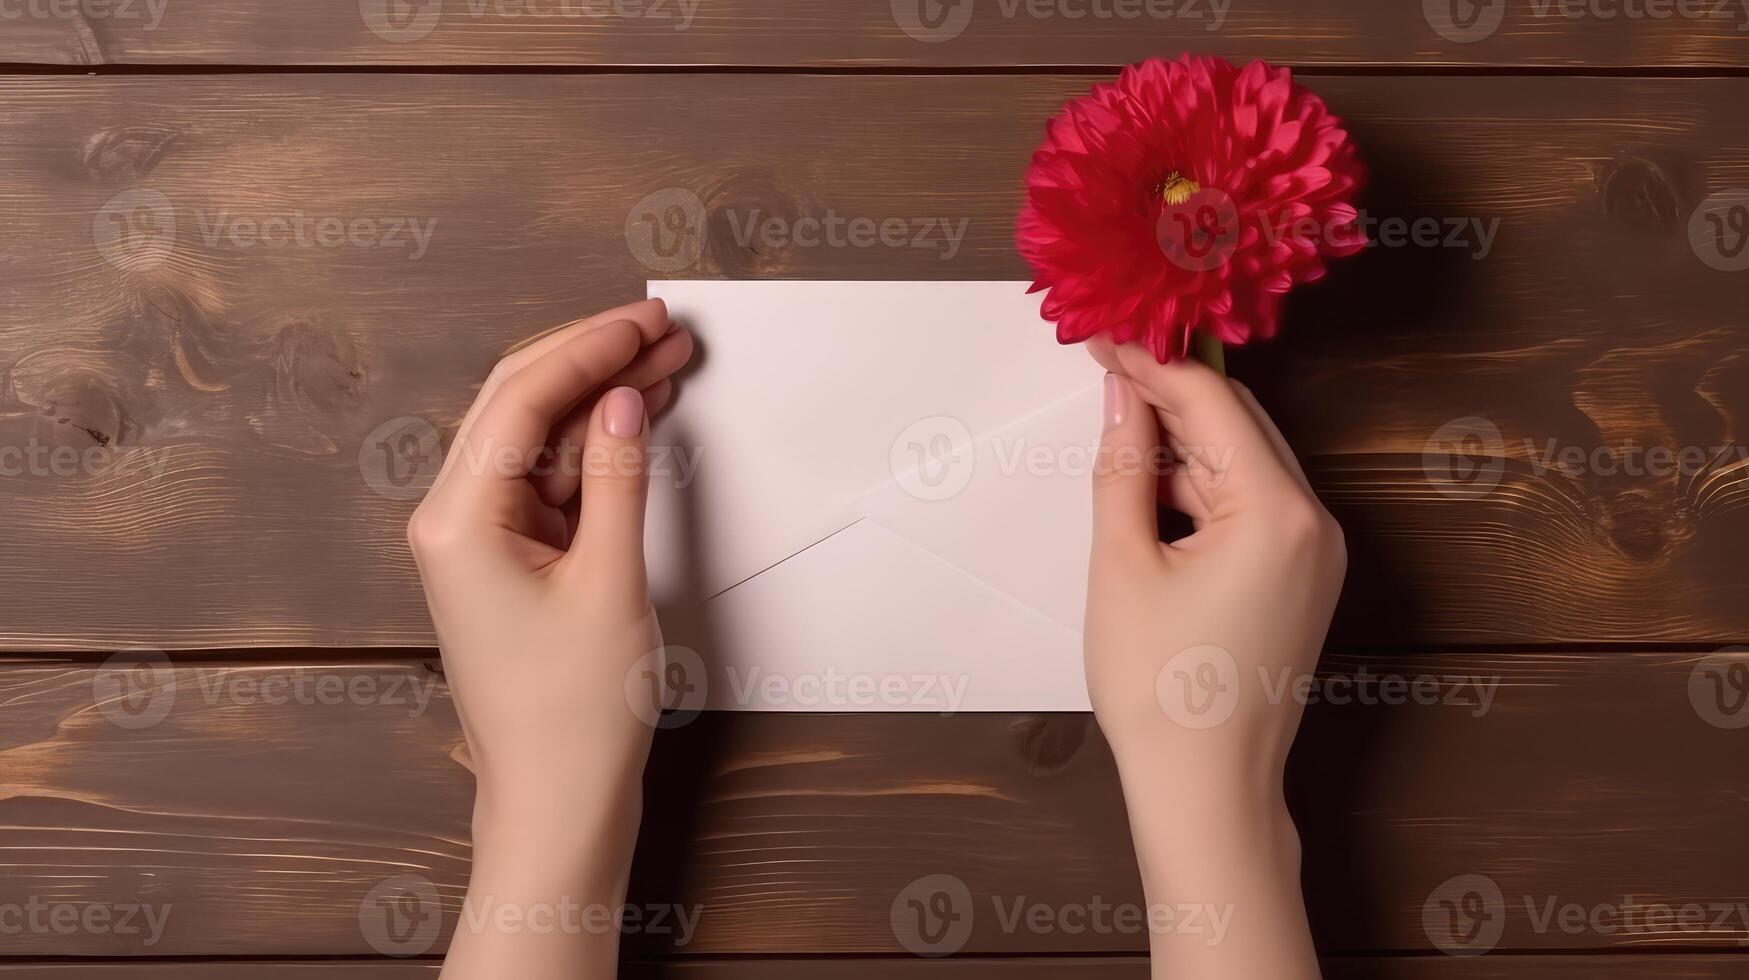 Top VIew Photo of Female Holding a Red Dahlia Flower and Envelope Mockup, .